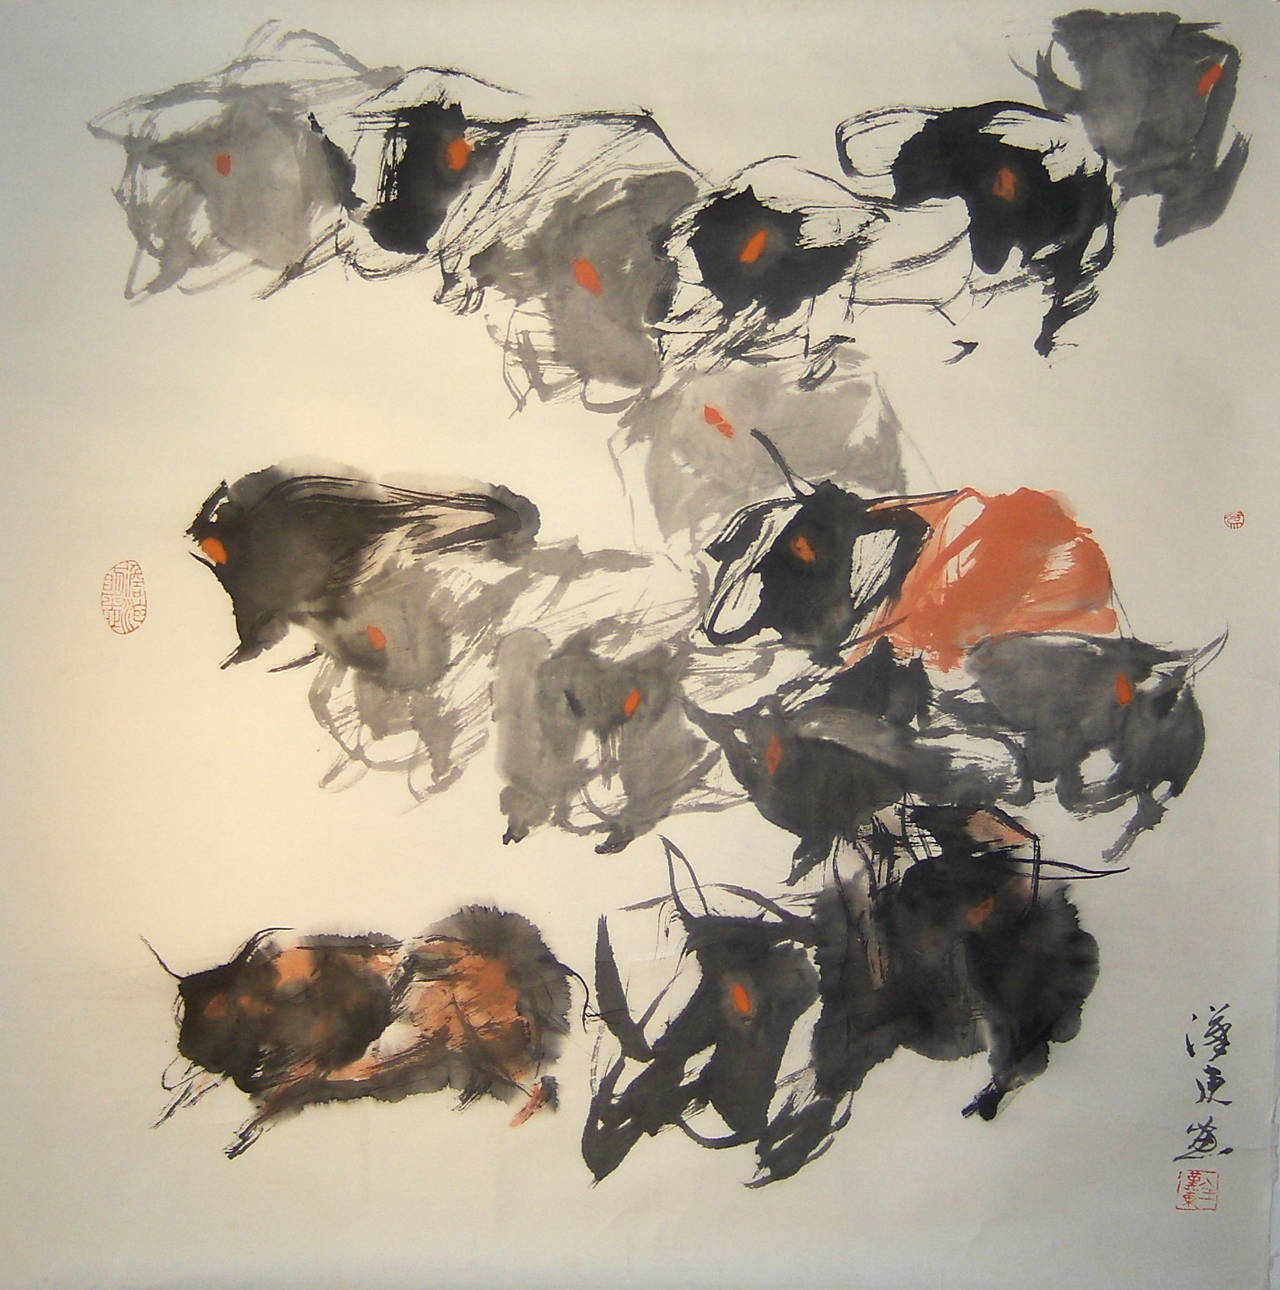 Quan Handong Figurative Art - "#11 Mountain Oxen Series" Chinese abstract ink on paper